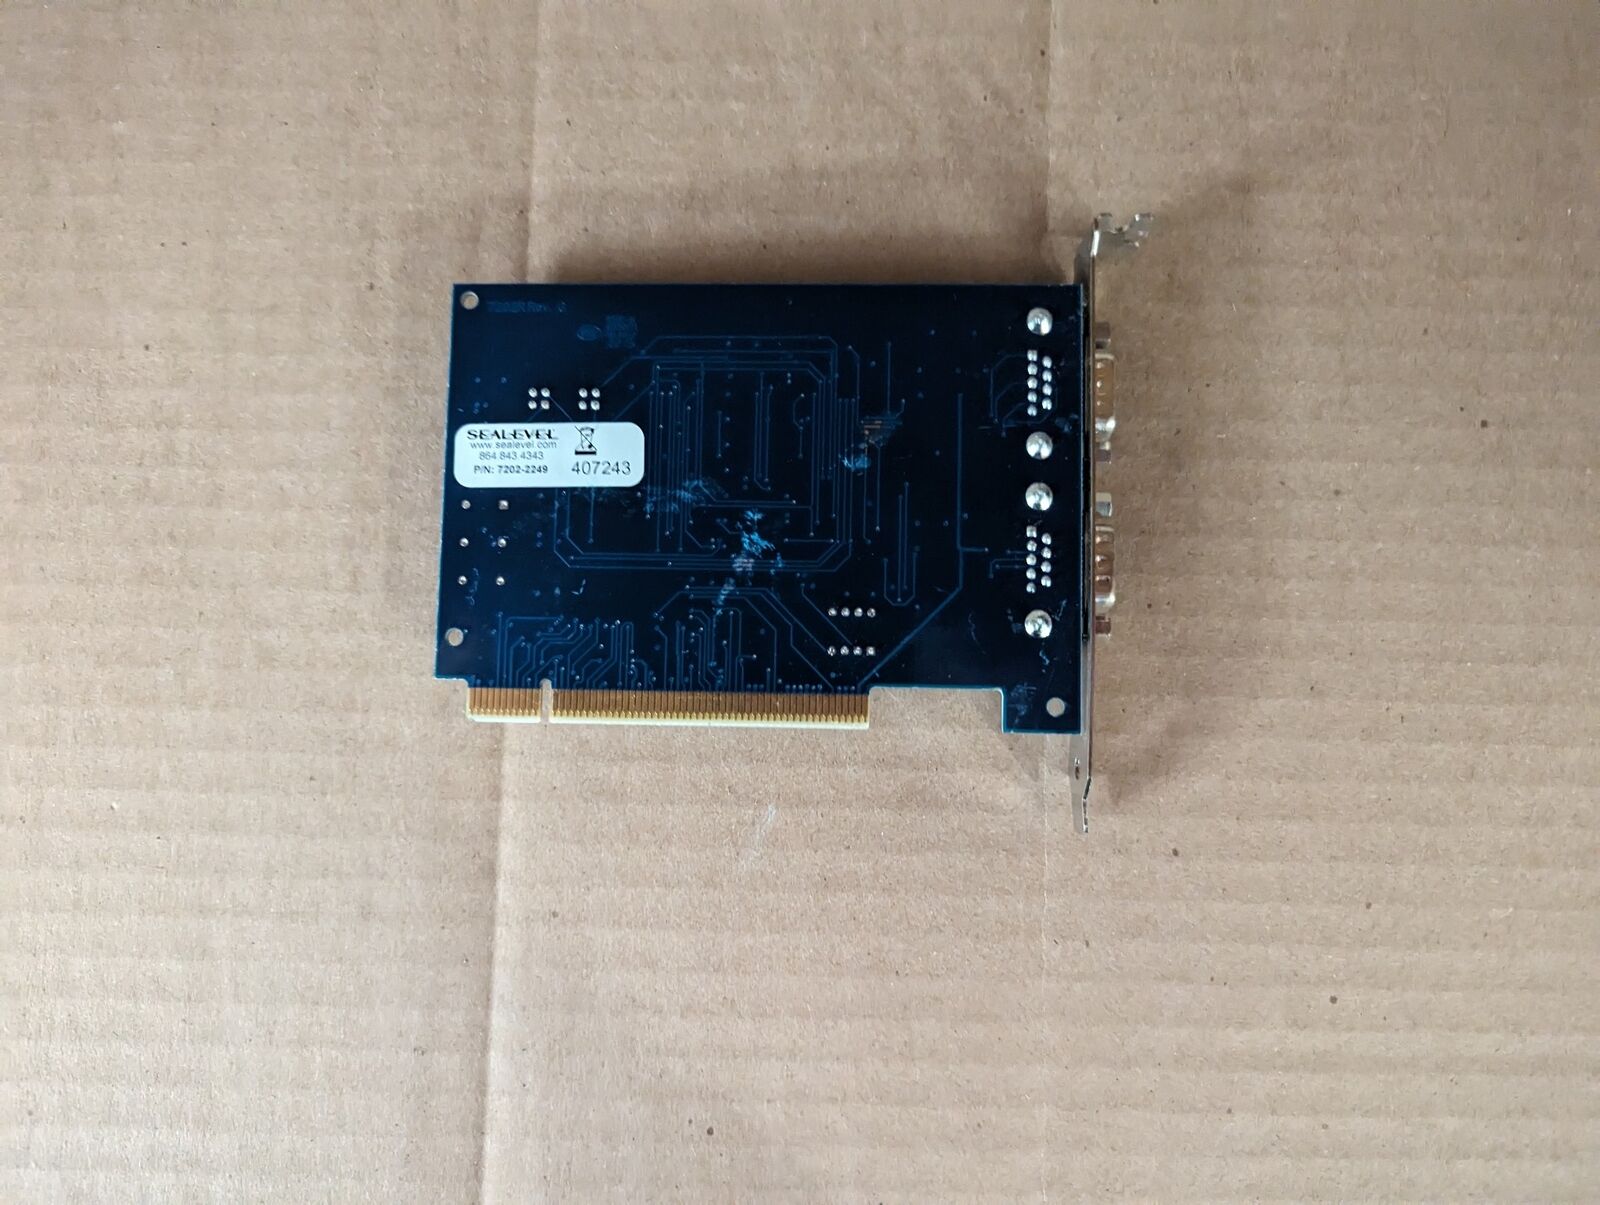 SEALEVEL 7202-2249 2-PORT RS-232 SERIAL PCI CARD H2-1(1)